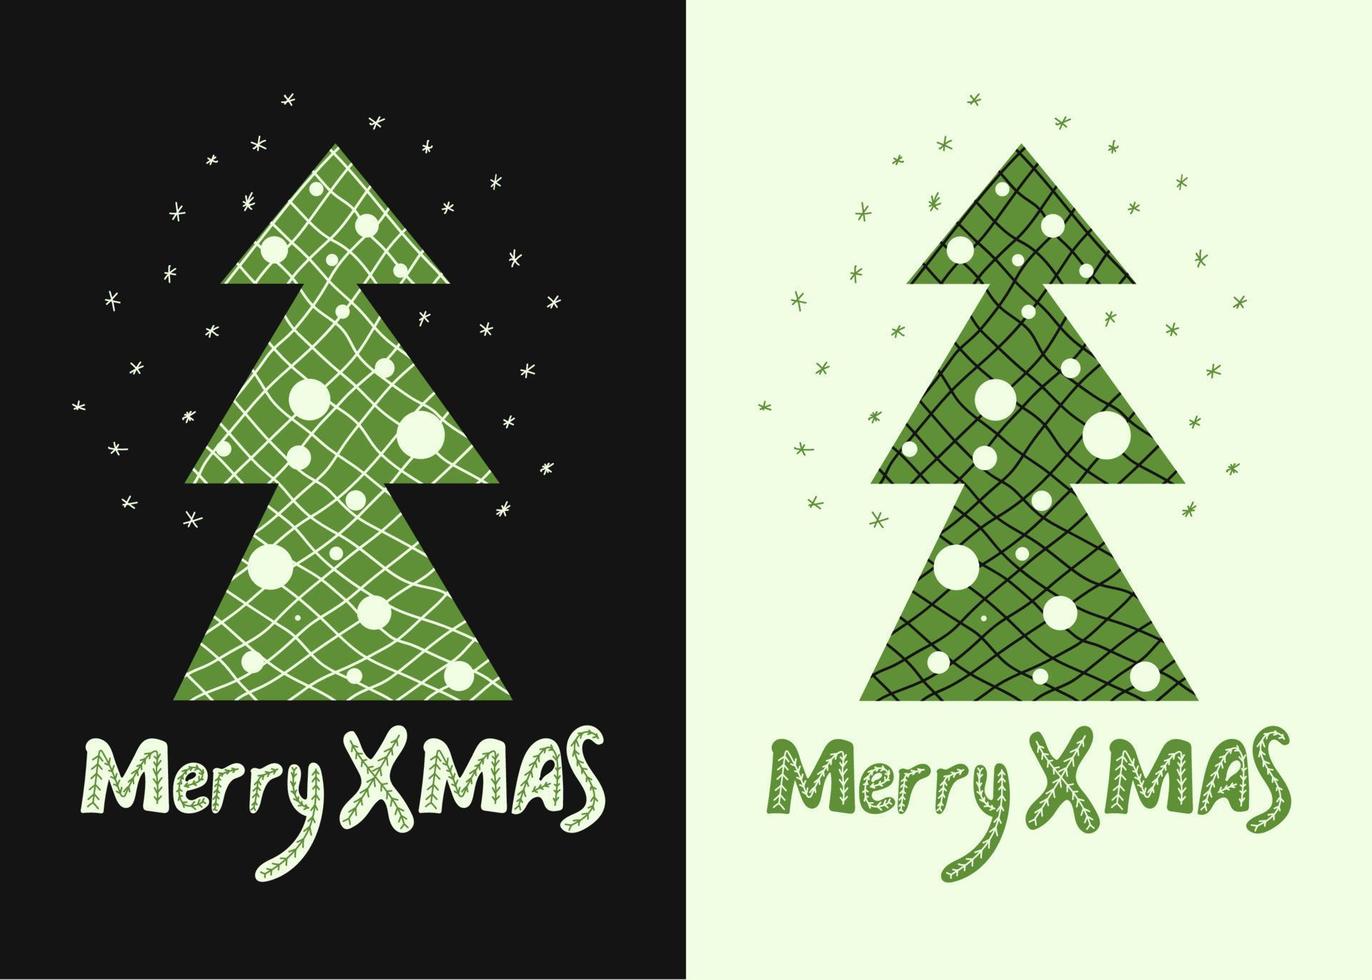 Merry Xmas quote with christmas tree. Unique handwriting wishes. Design element for congratulation card, banner or flyer. Vector illustration